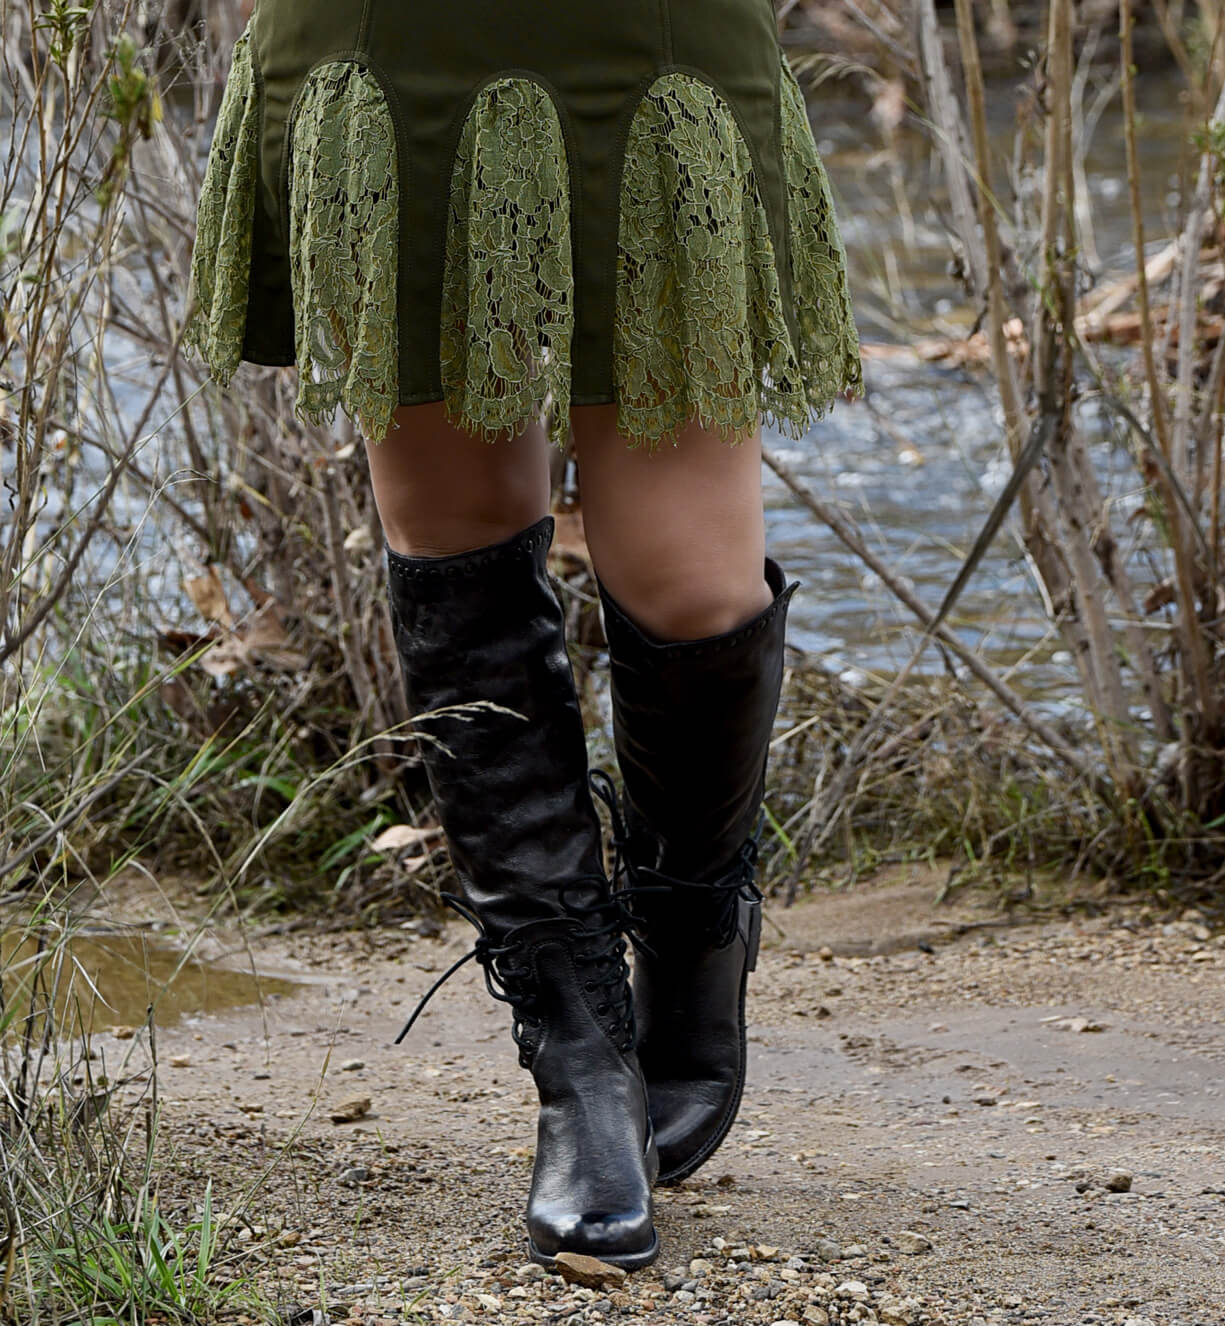 A woman in a green Loxley dress standing next to a river. Brand: Bed Stu.